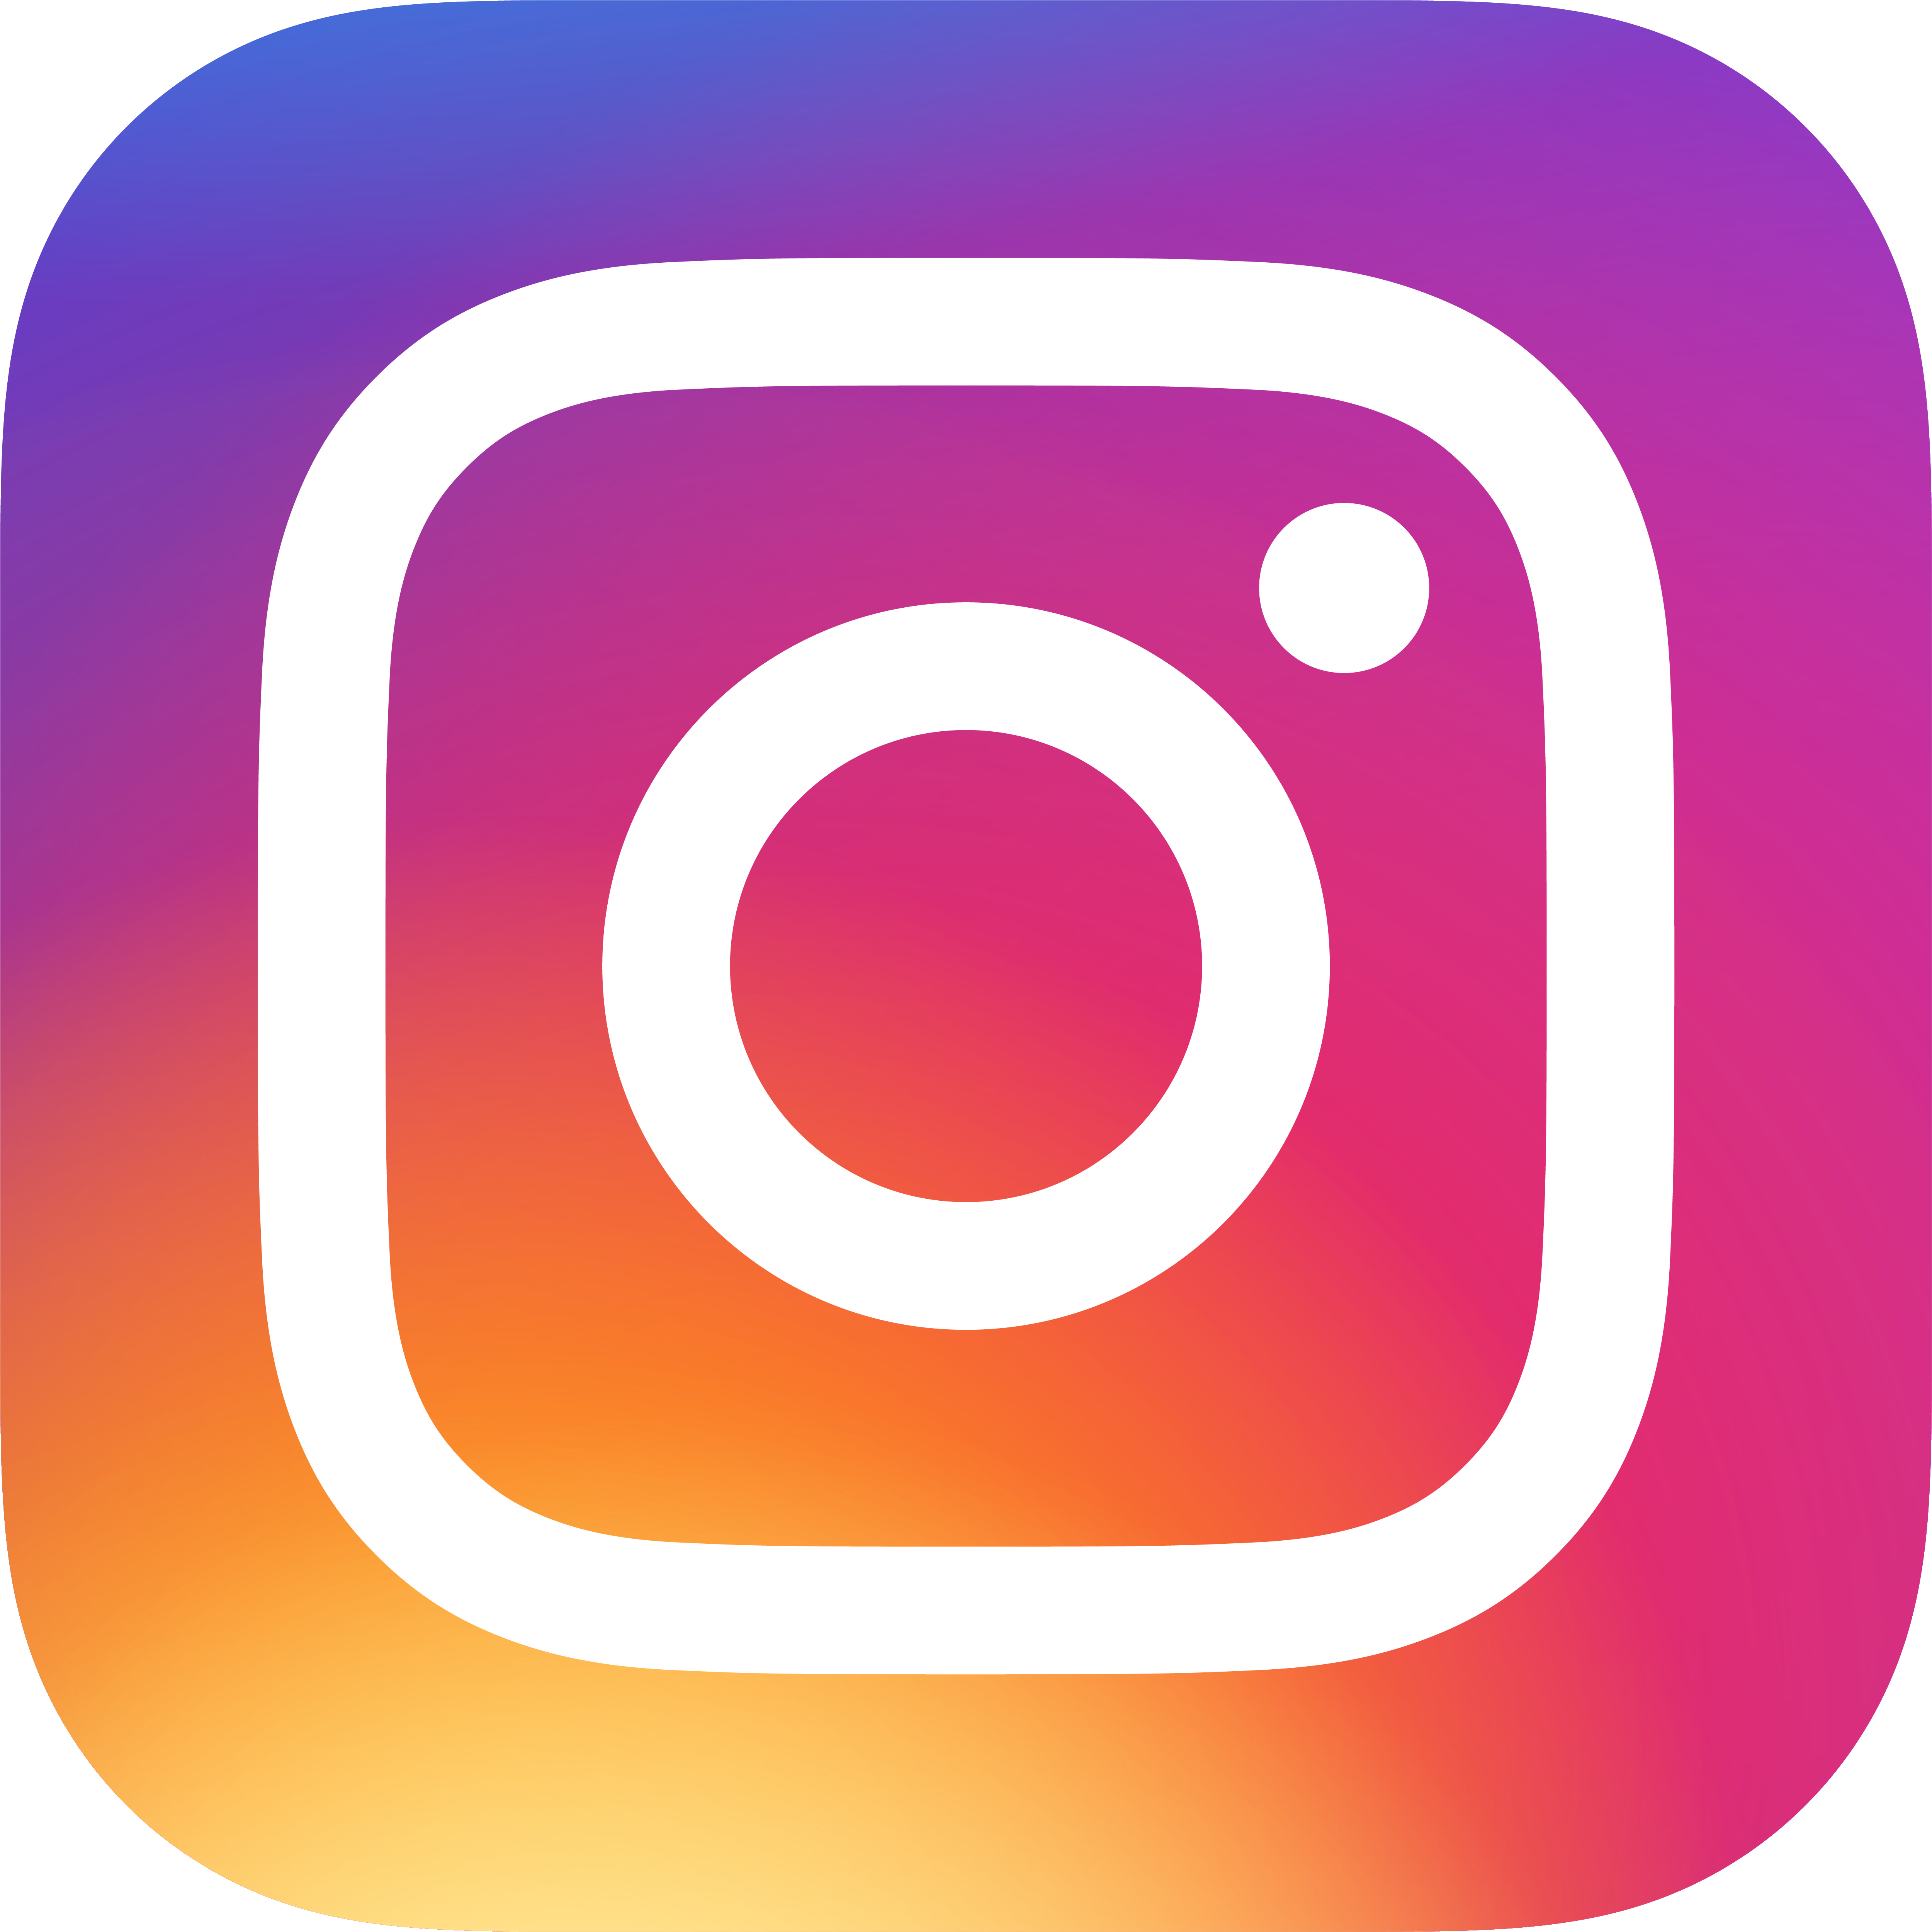 instagram_appicon_aug2017.png